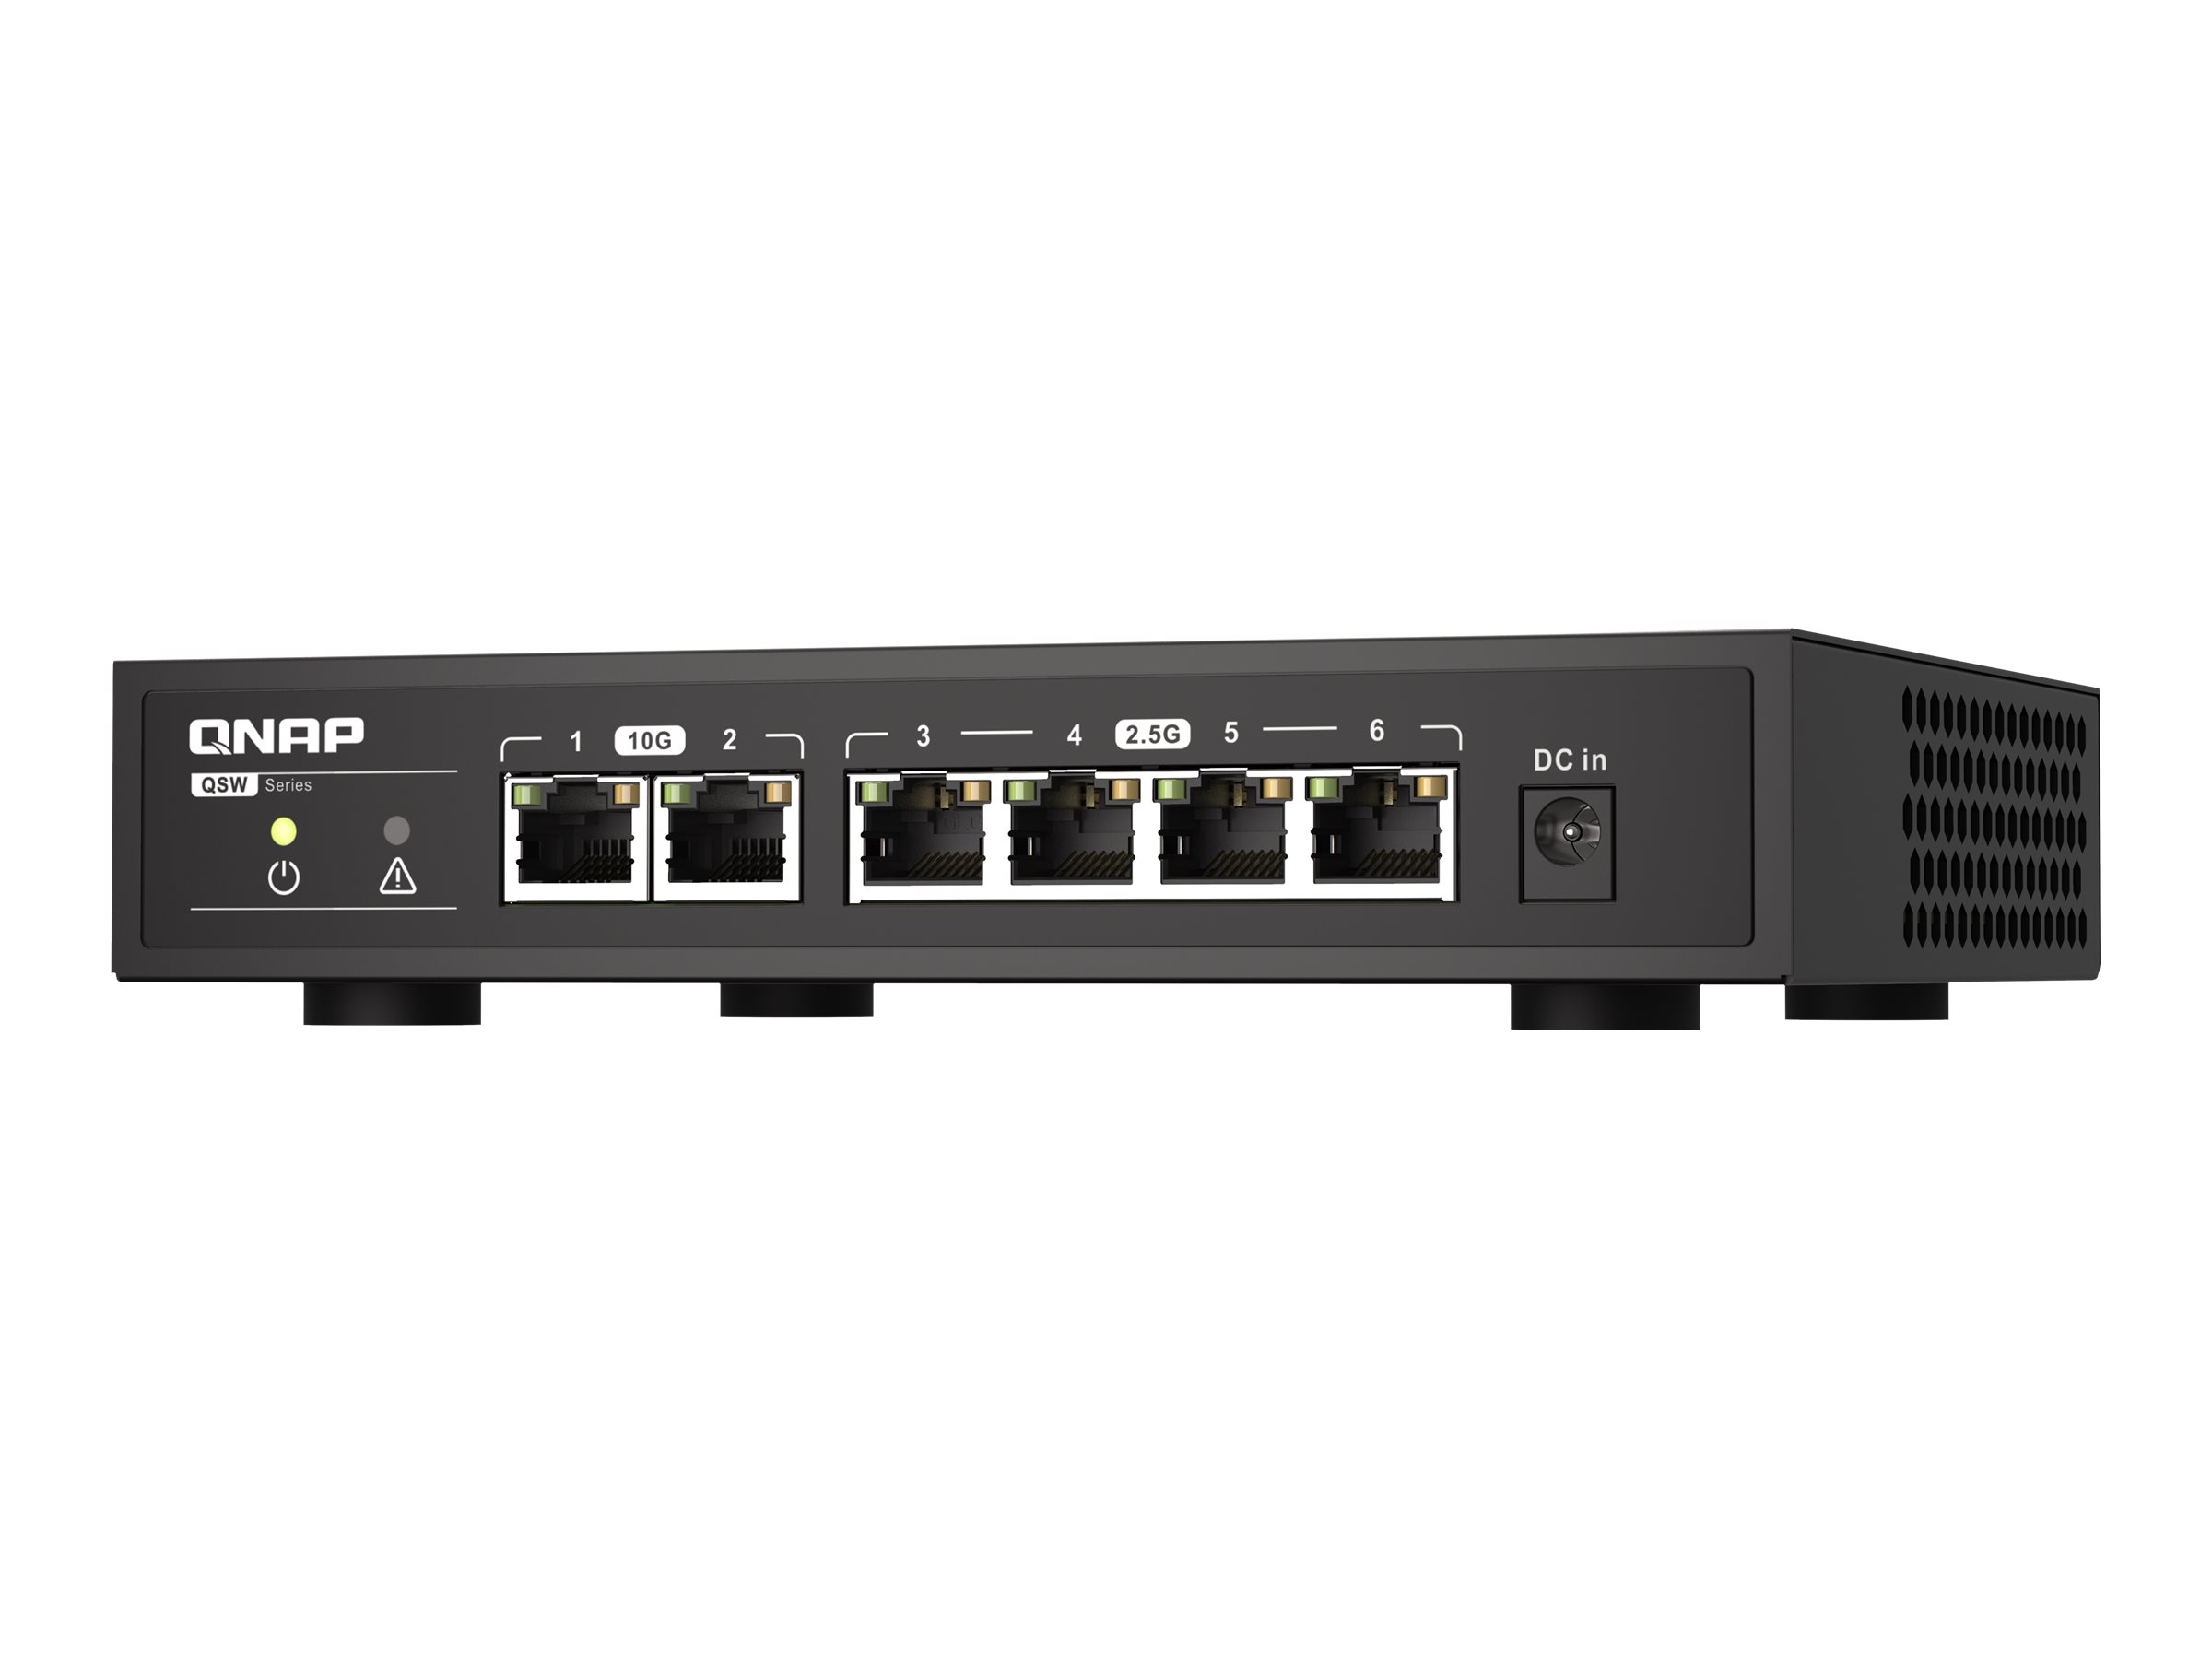 QNAP QSW-2104-2T - Switch - unmanaged - 2 x 100/1000/2.5G/5G/10GBase-T + 4 x 100/1000/2.5G - Desktop